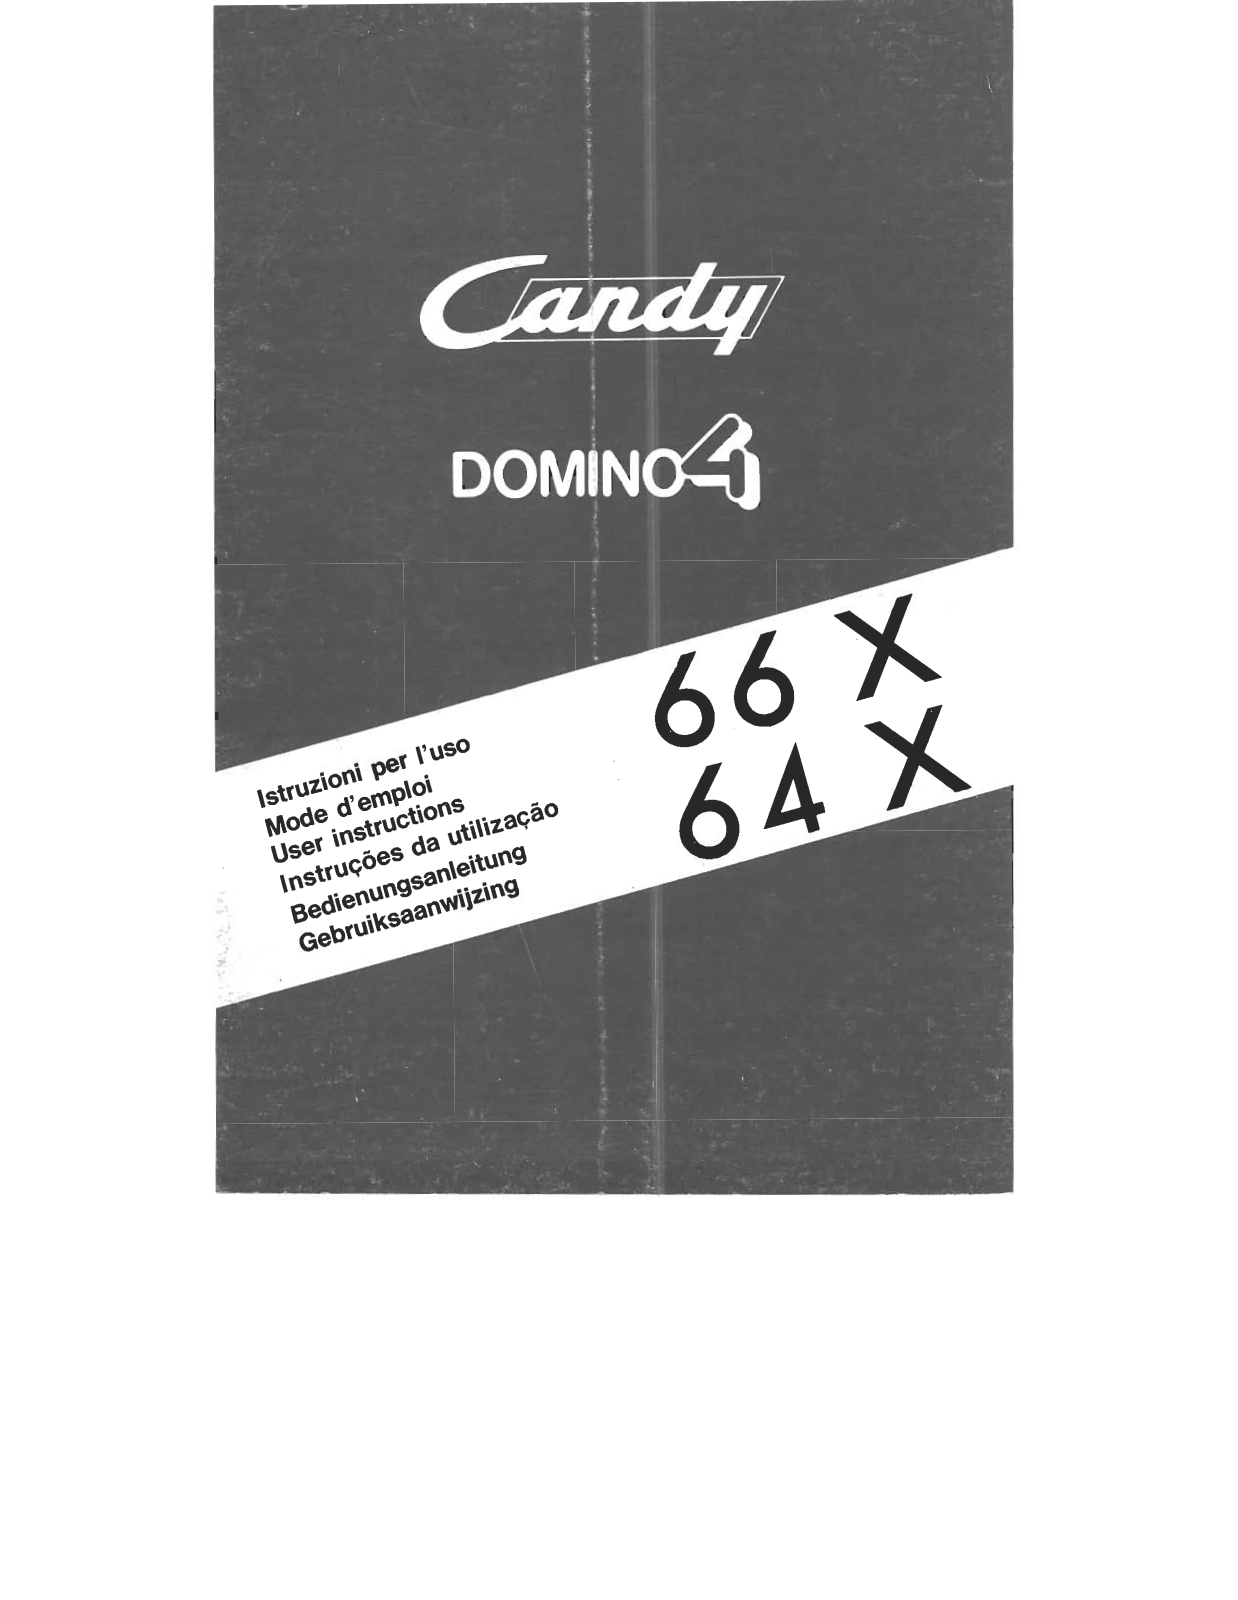 CANDY 66 X, DOMINO 4 User Manual